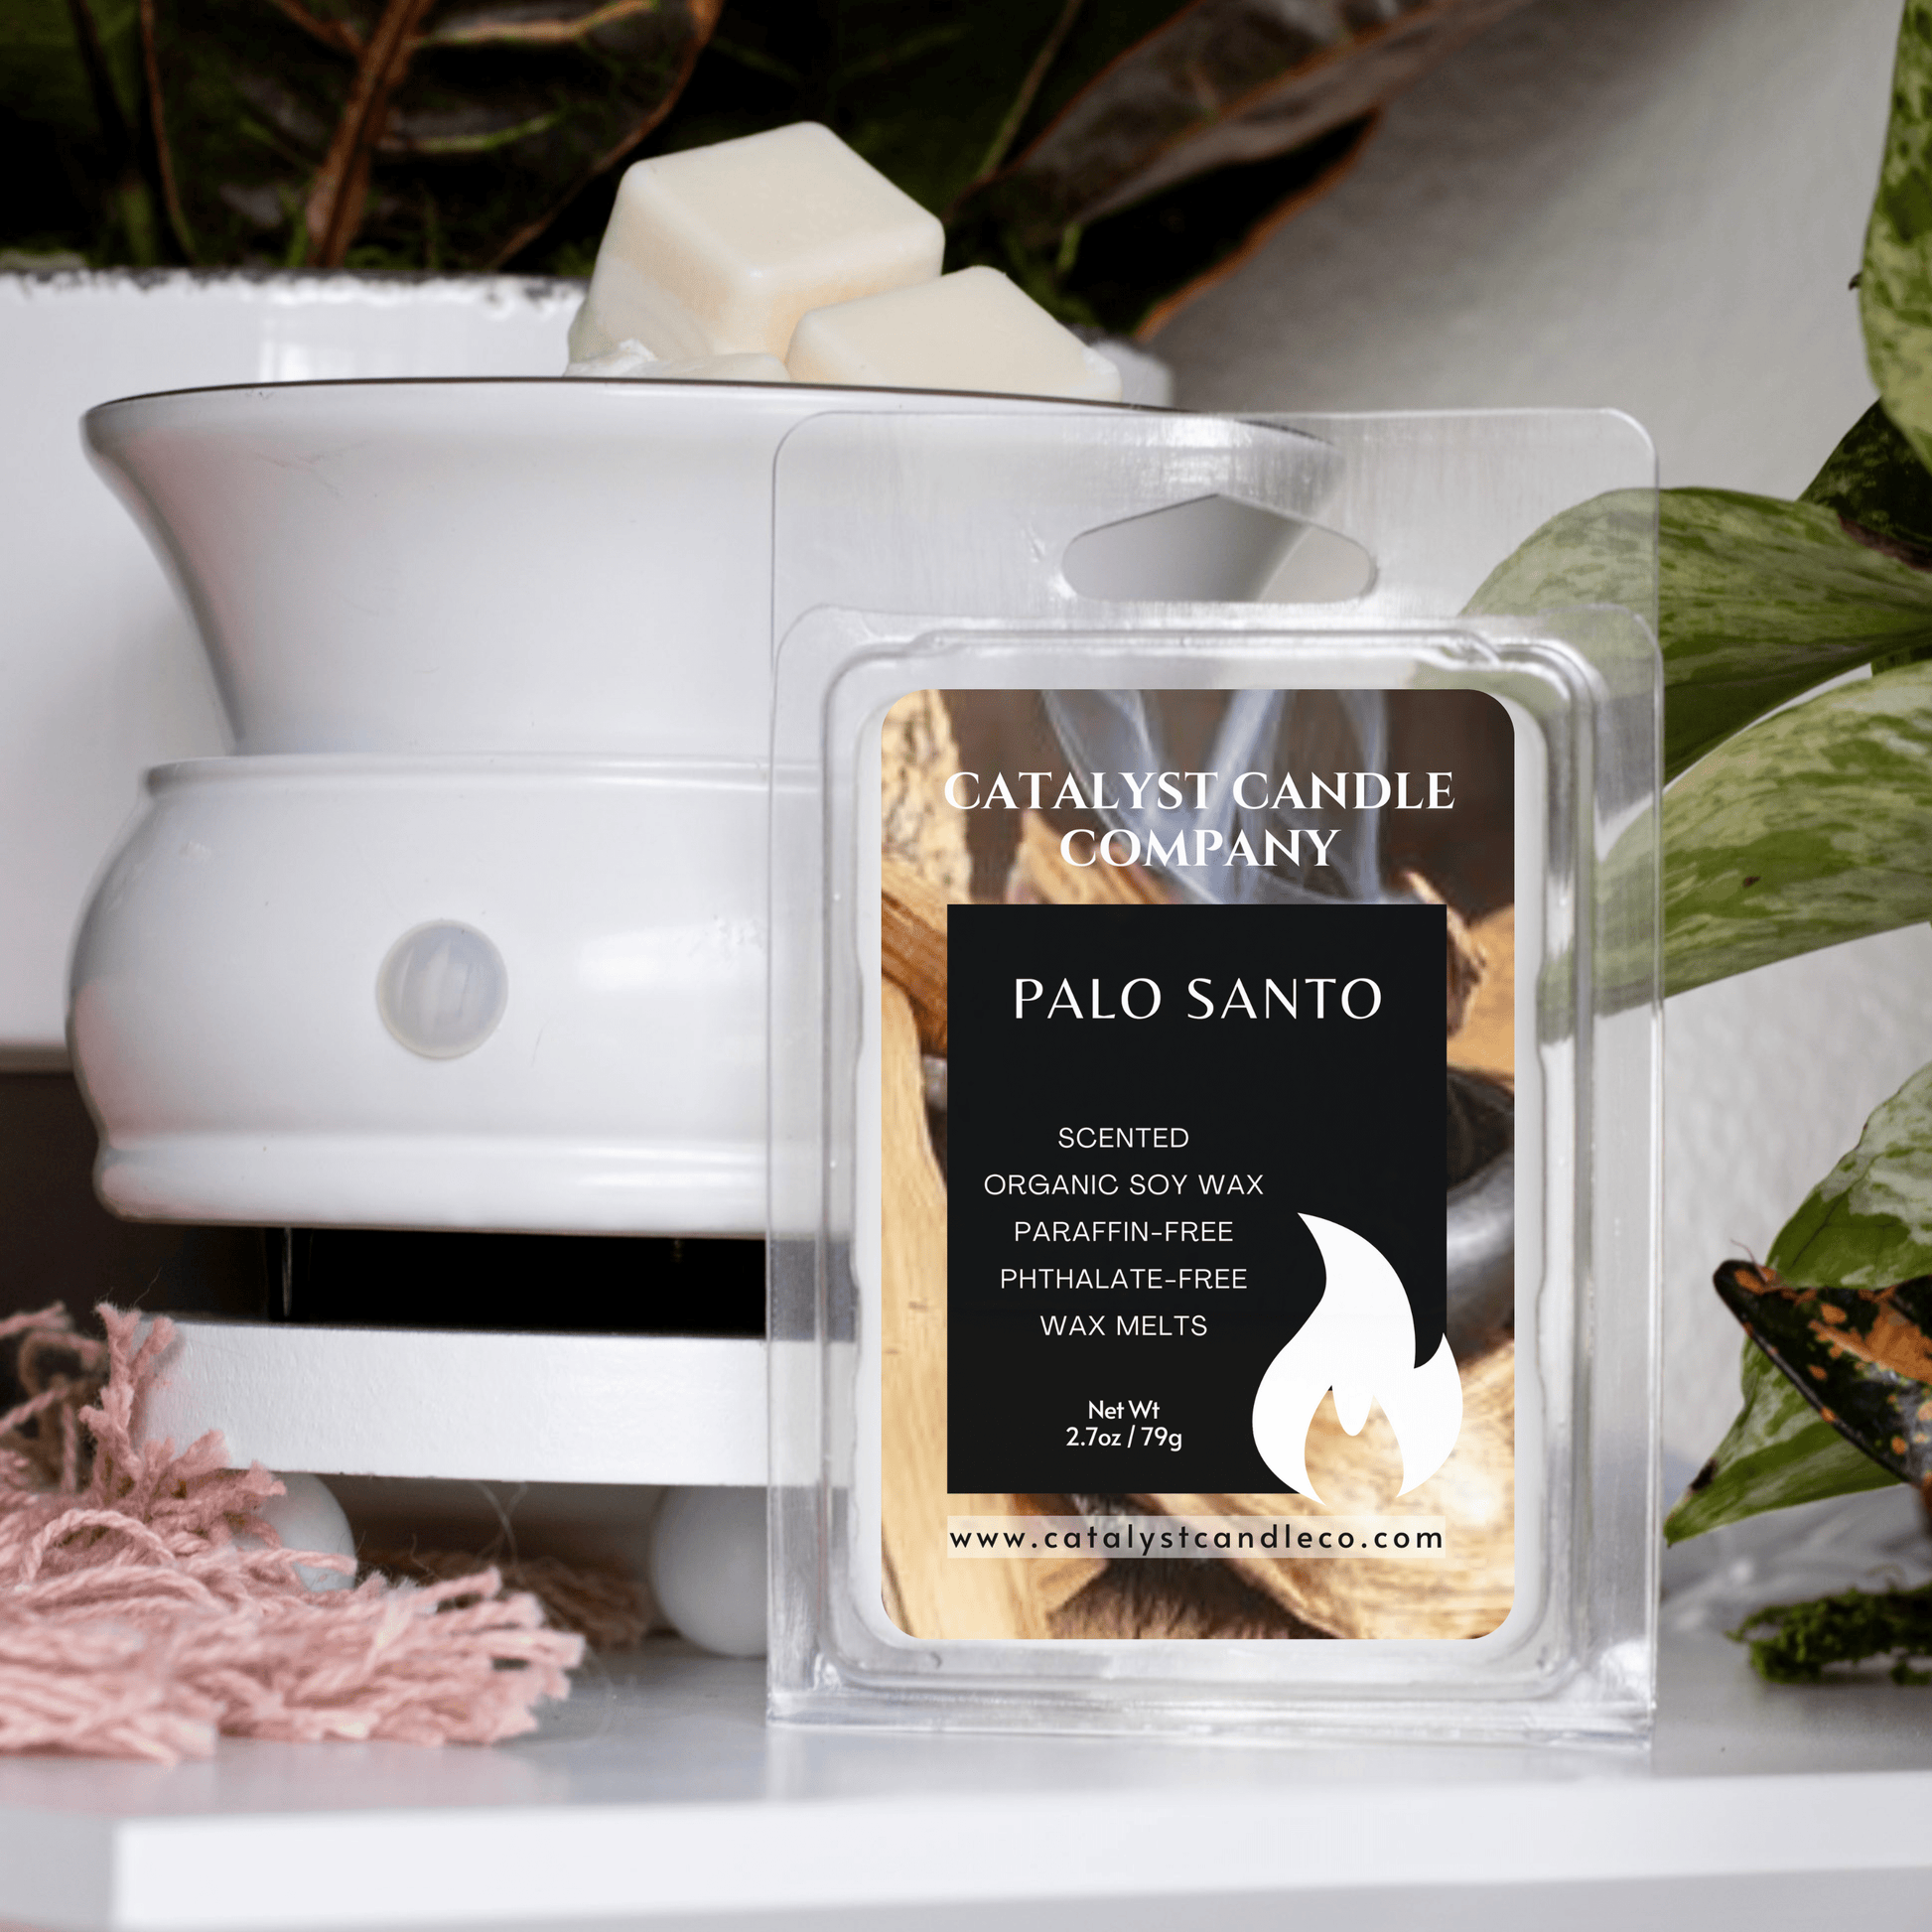 Masculine and earthy aroma. Scented organic soy wax melts. Catalyst Candle Company, LLC